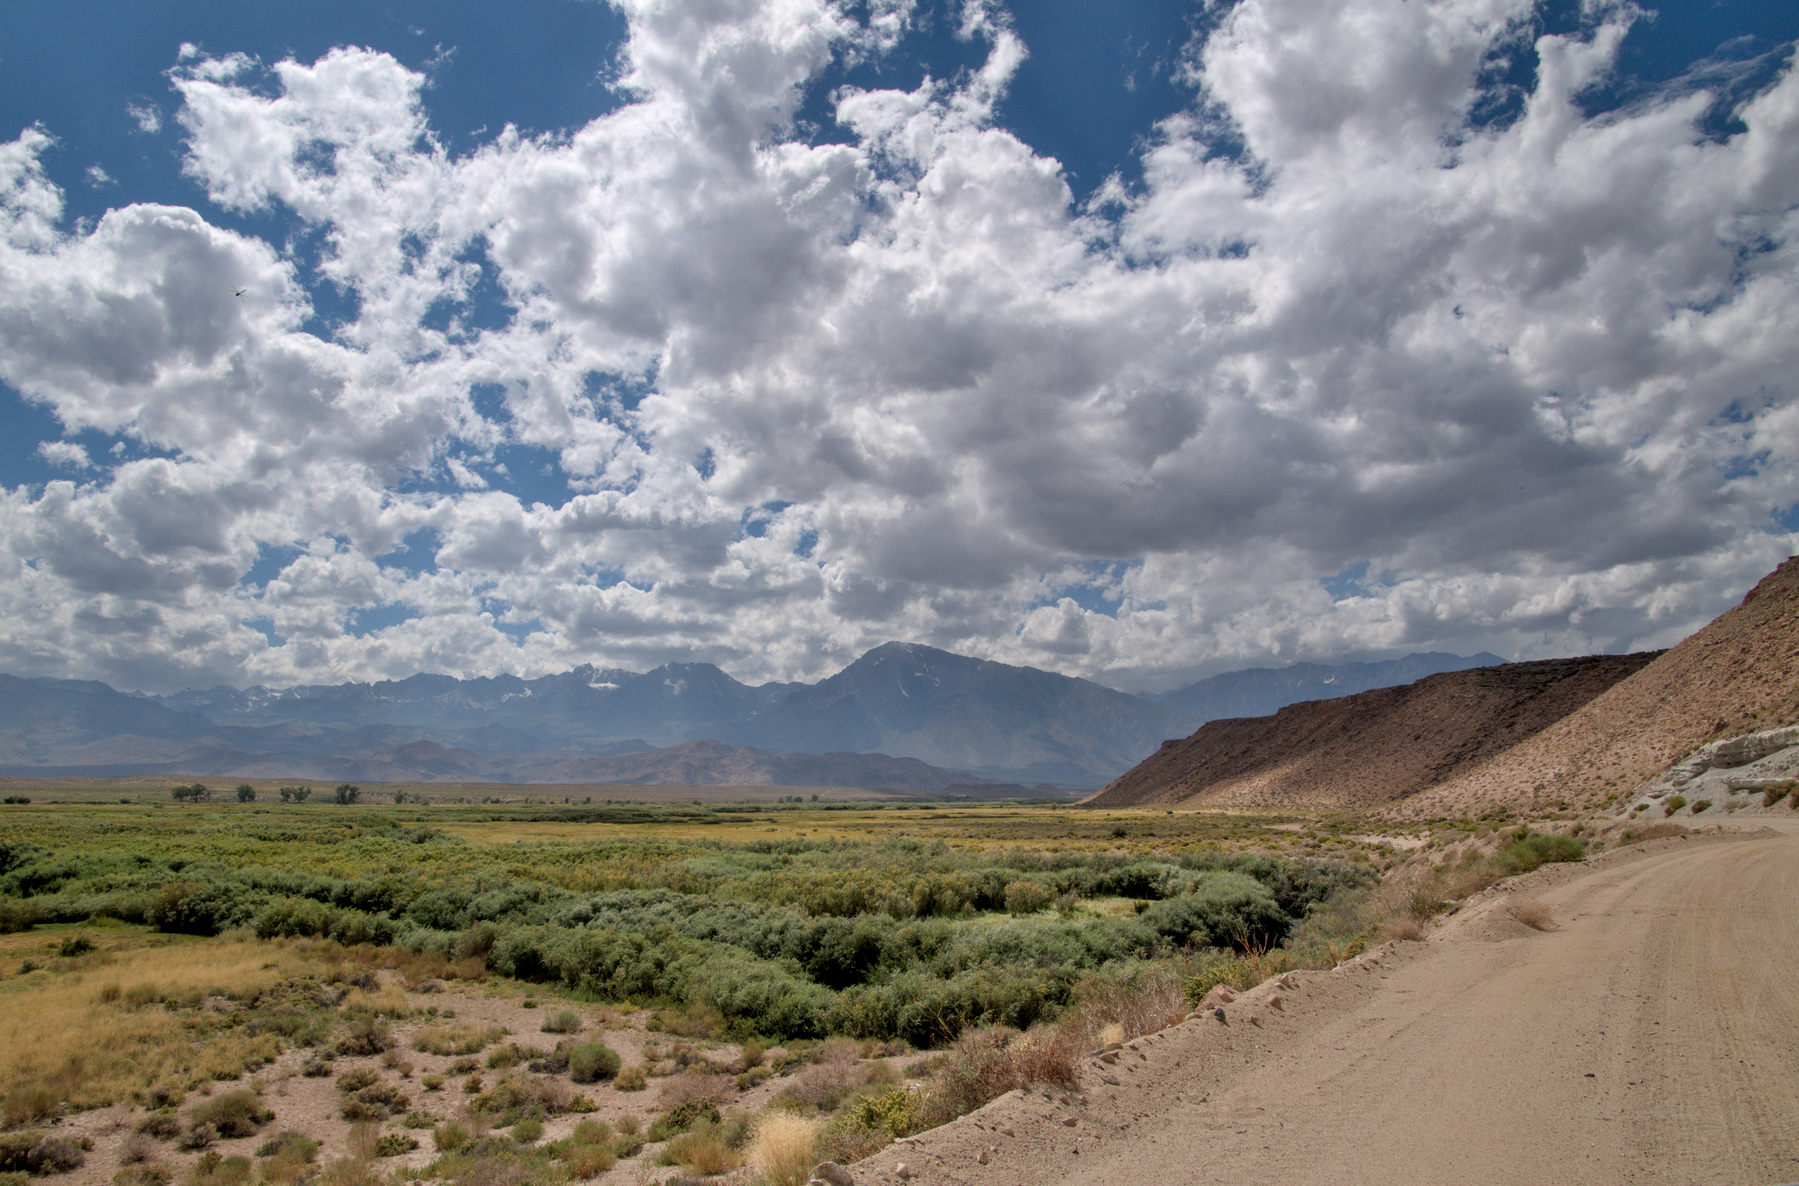 A wide green river valley is bordered on the right by a bluff of pink volcanic rock.  The Sierra Nevada is seen in the distance and the sky is full of cumulonimbus clouds.